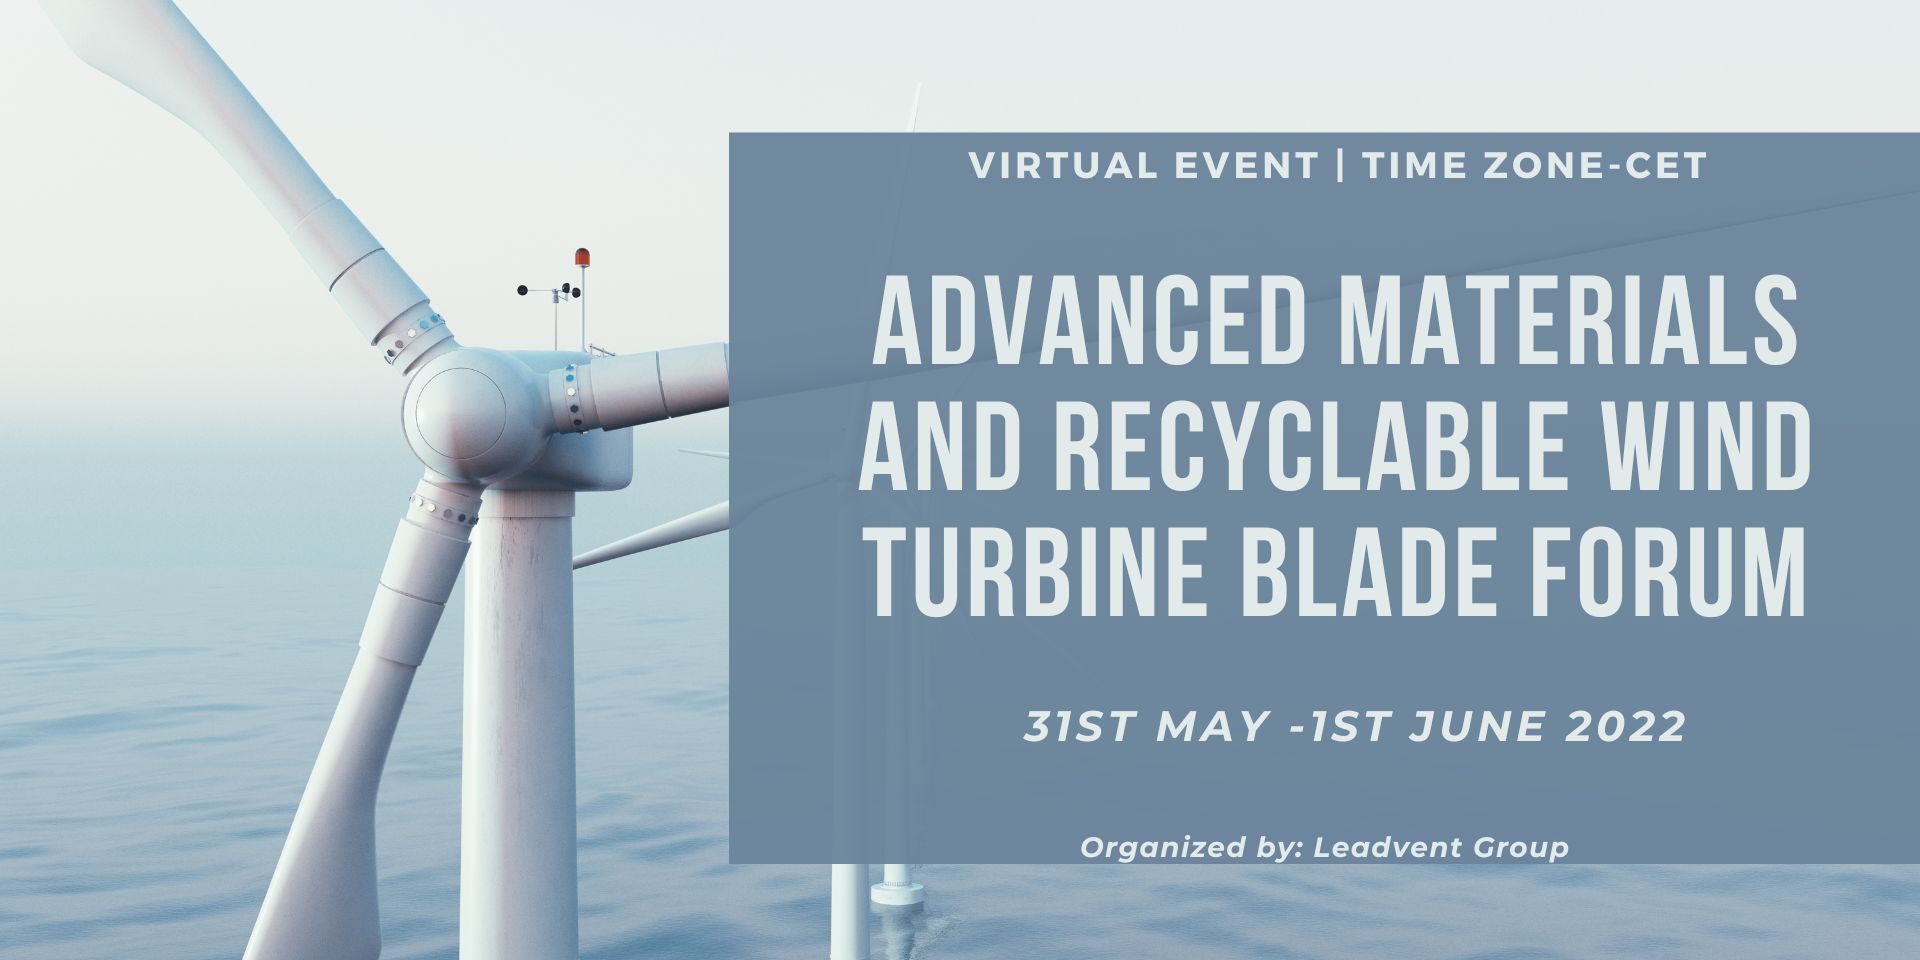 Advanced Materials and Recyclable Wind Turbine Blade Forum organized by Leadvent Group